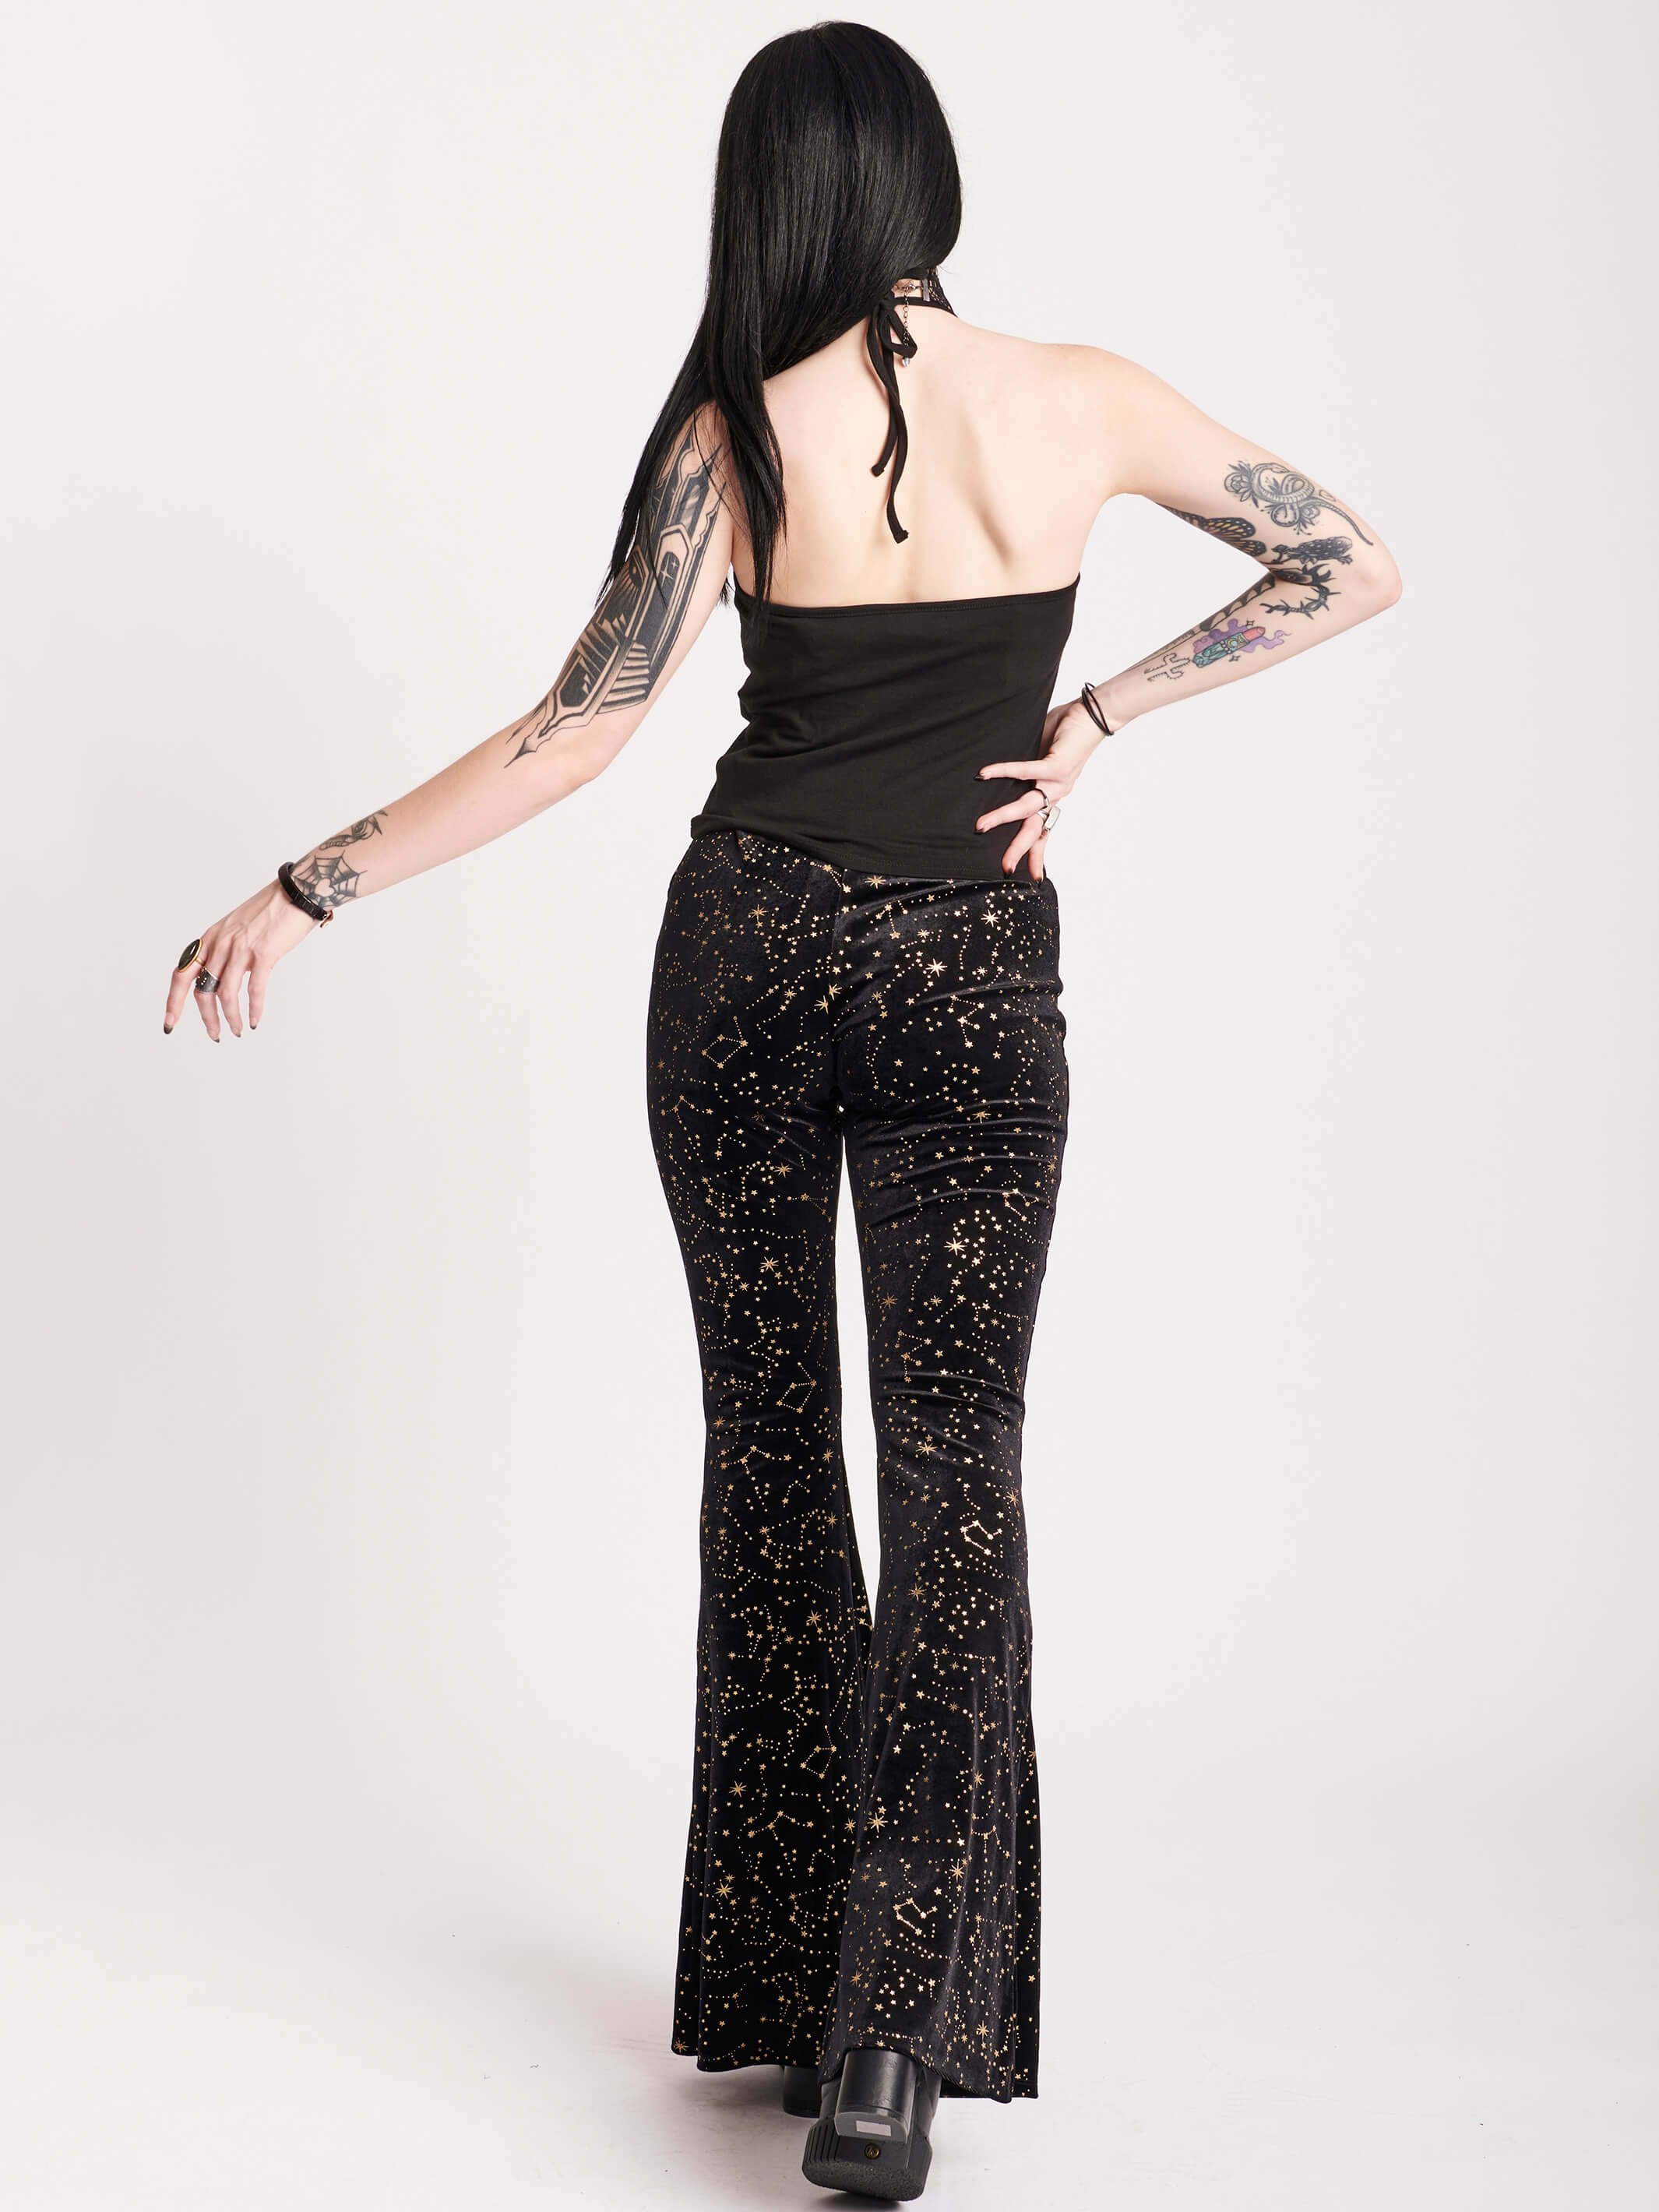 halter with lace and gold foil graphics